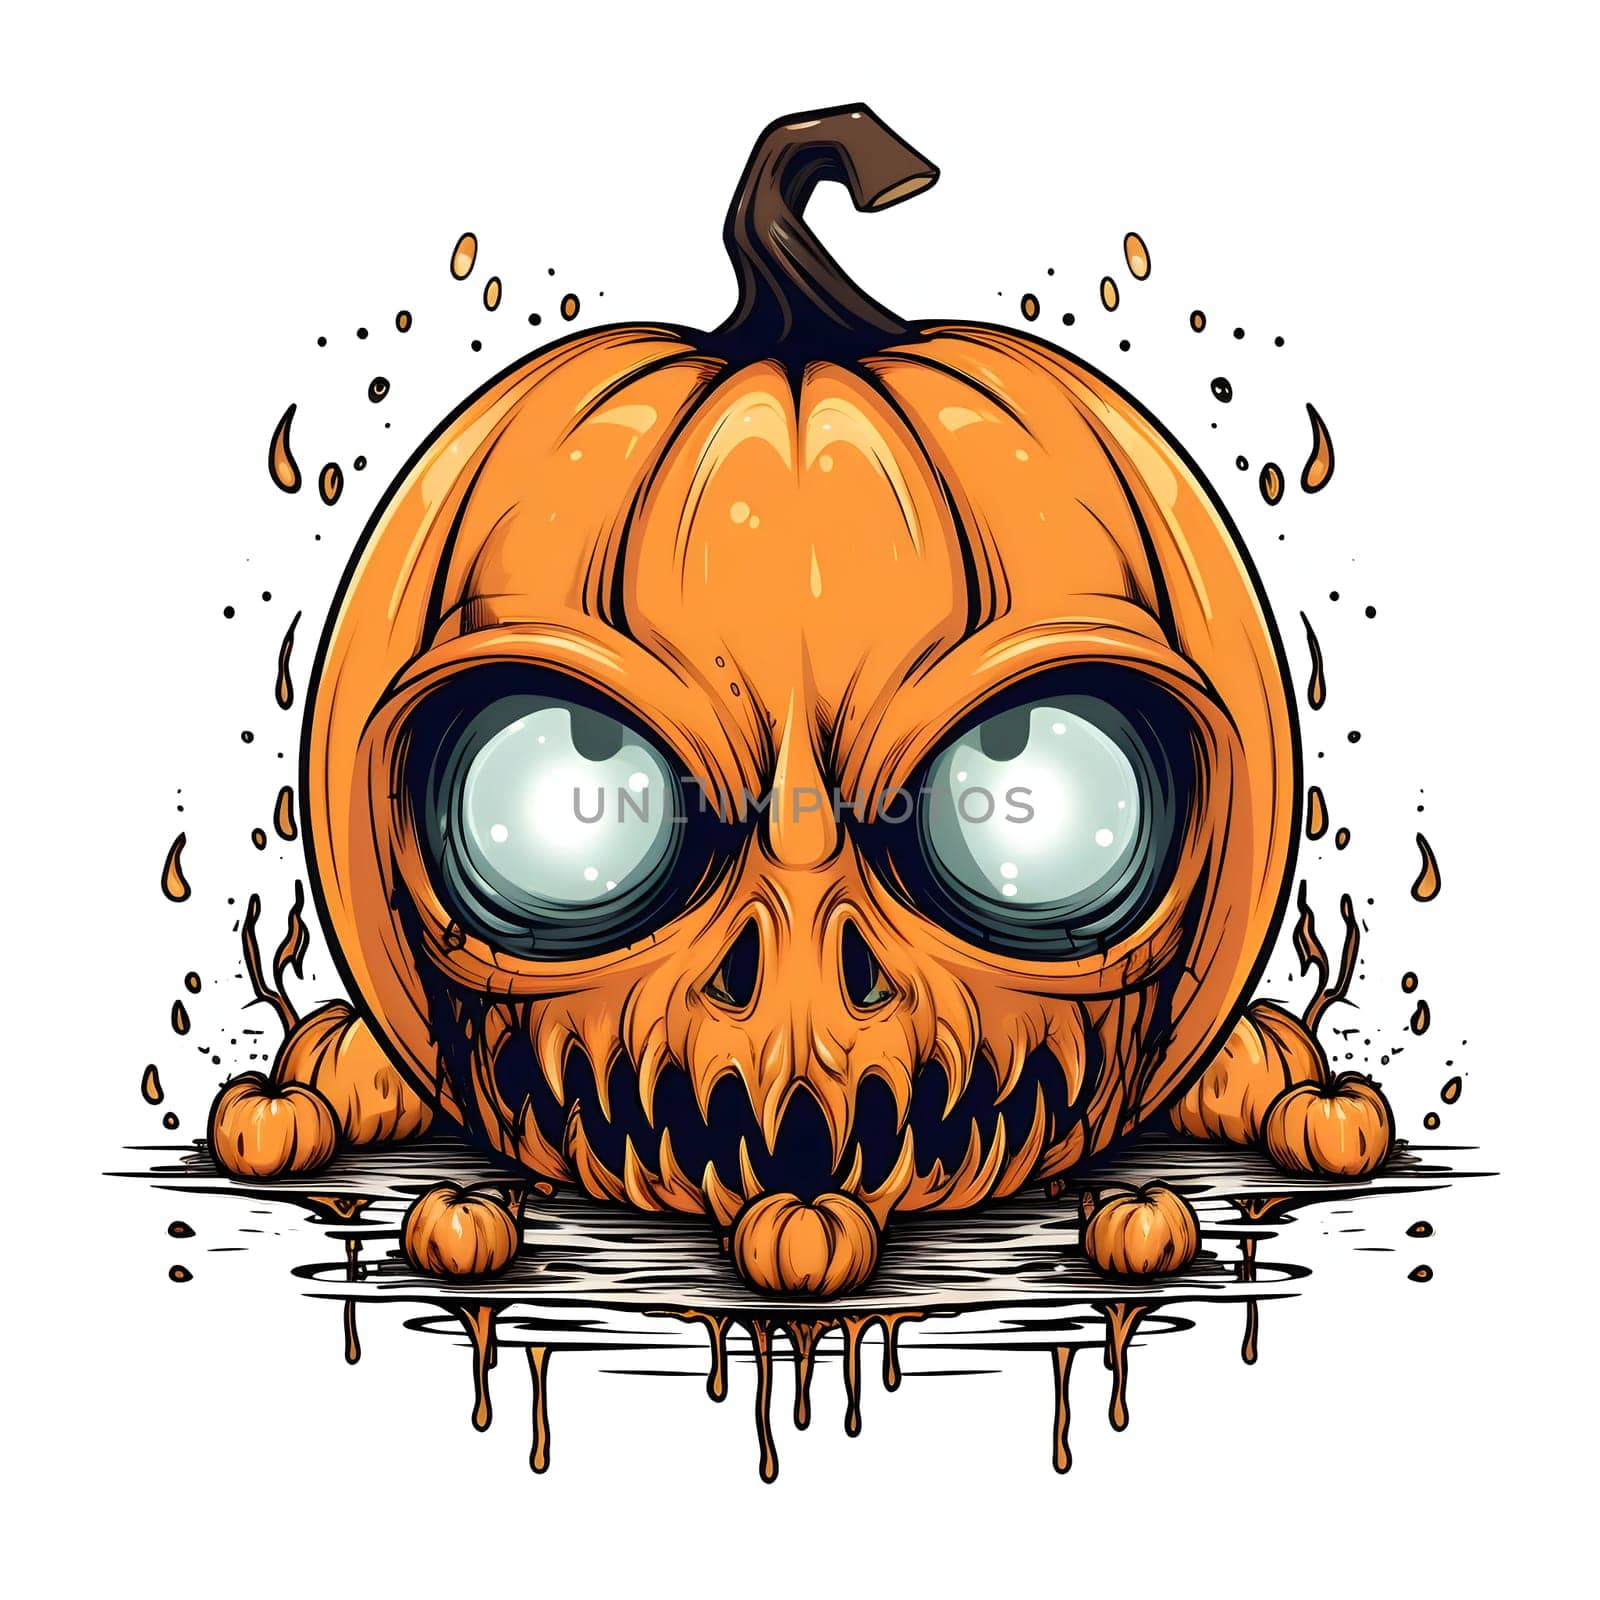 Dark pumpkin with big eyes, Halloween image on a white isolated background. Atmosphere of darkness and fear.